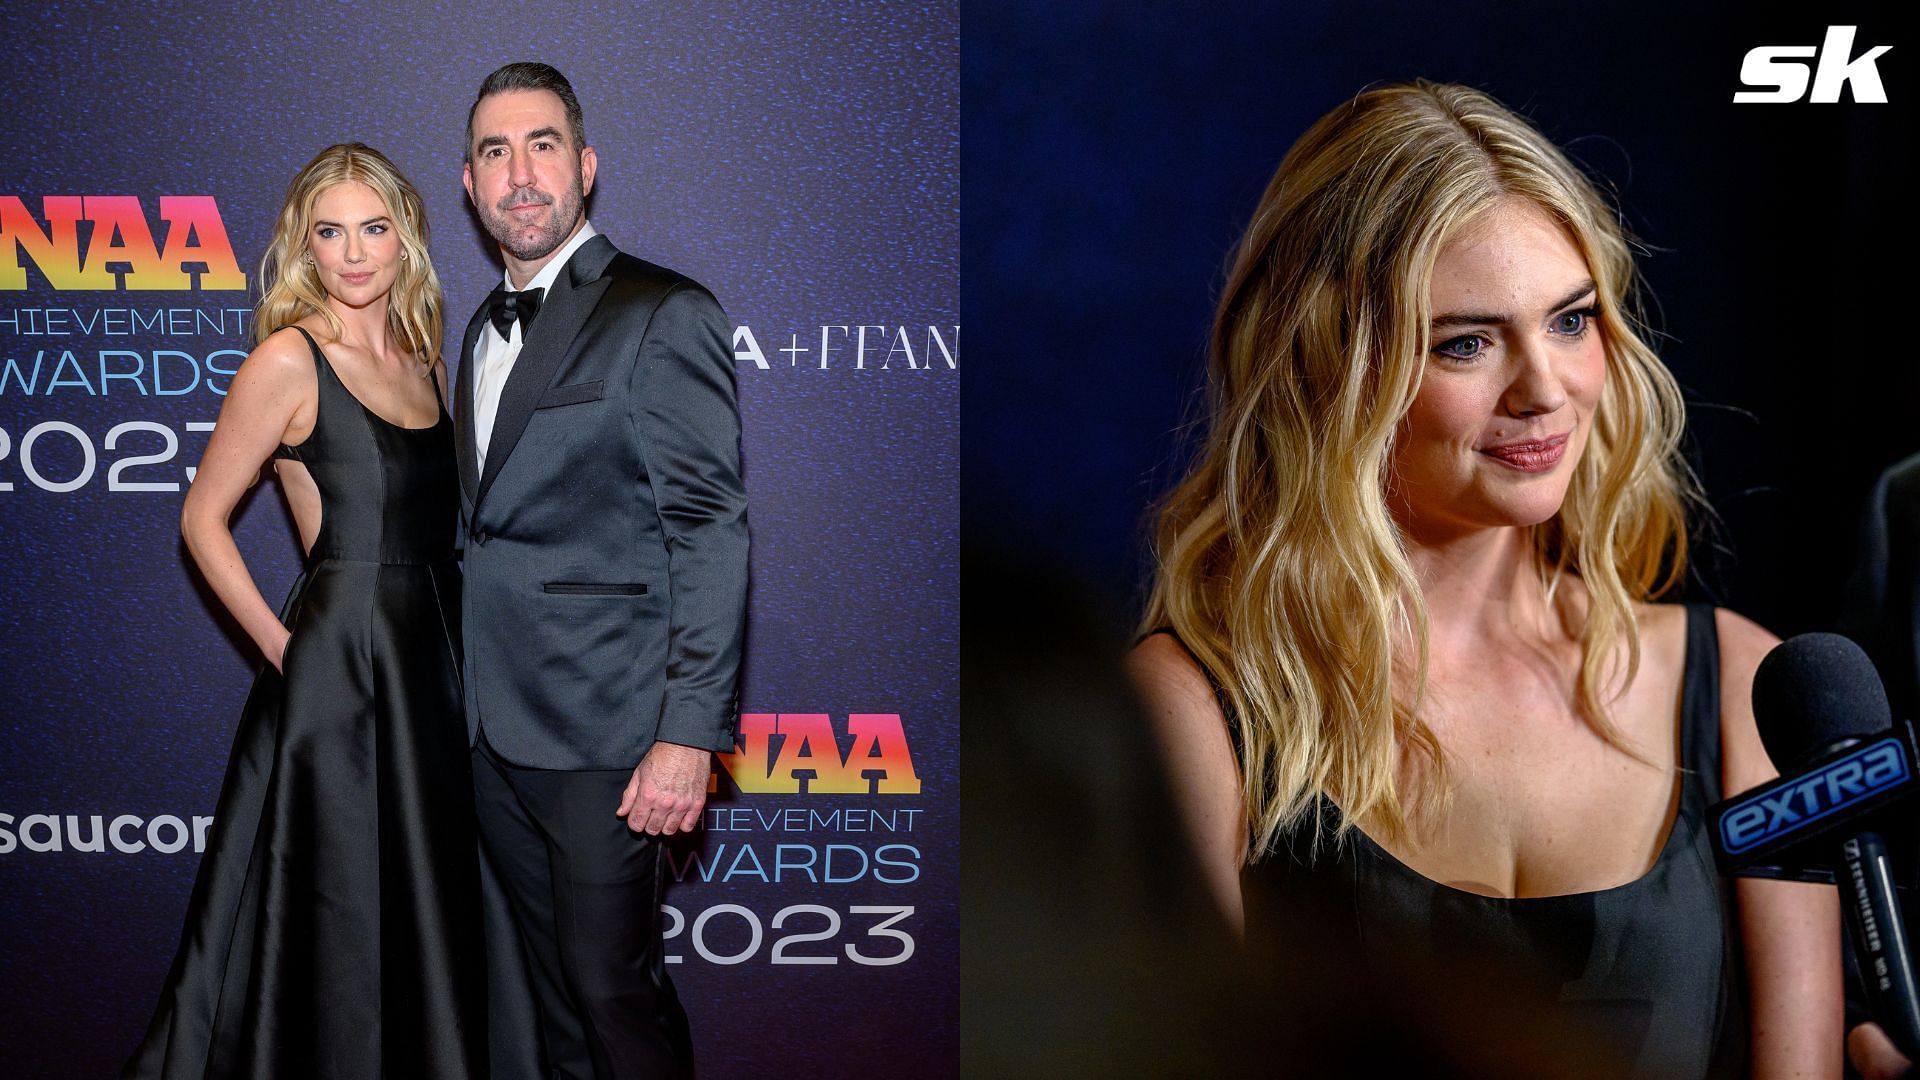 Kate Upton gushes all over Justin Verlander&rsquo;s stylish outfit at &quot;Shoe Oscars&quot;